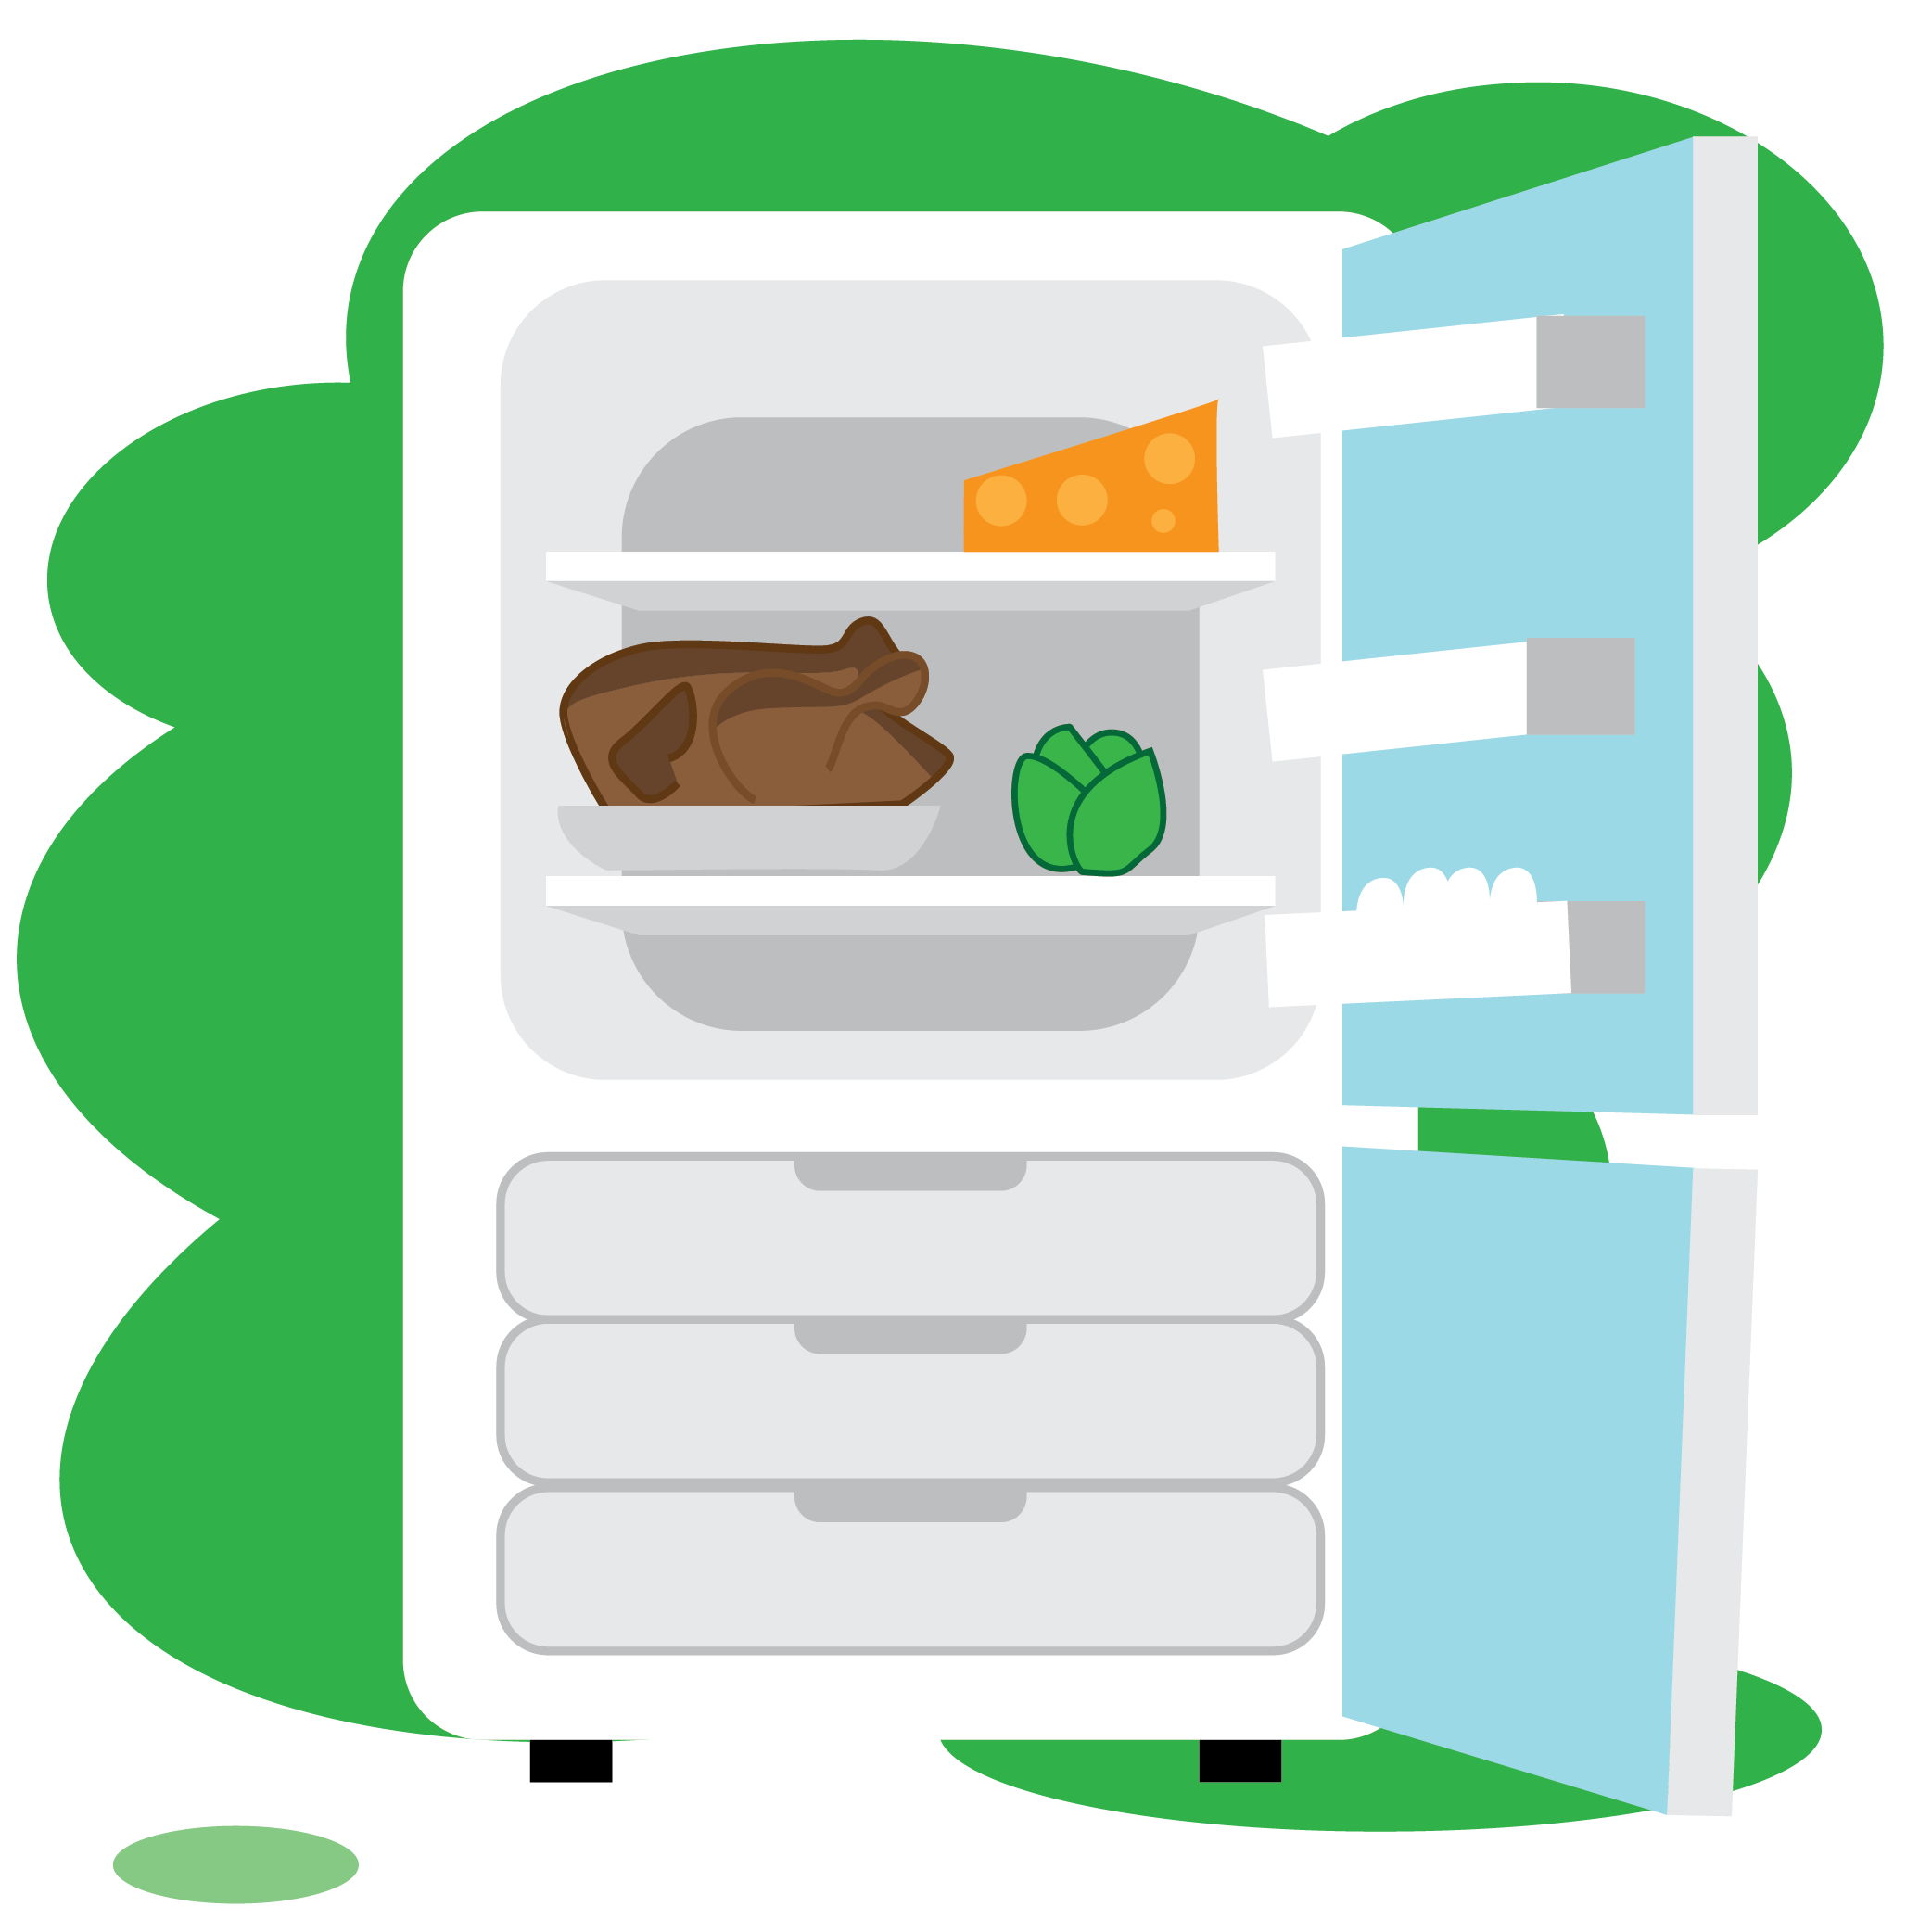 Illustration of open refrigerator with leftovers from Thanksgiving including a turkey, a leafy green vegetable and some cheese. 